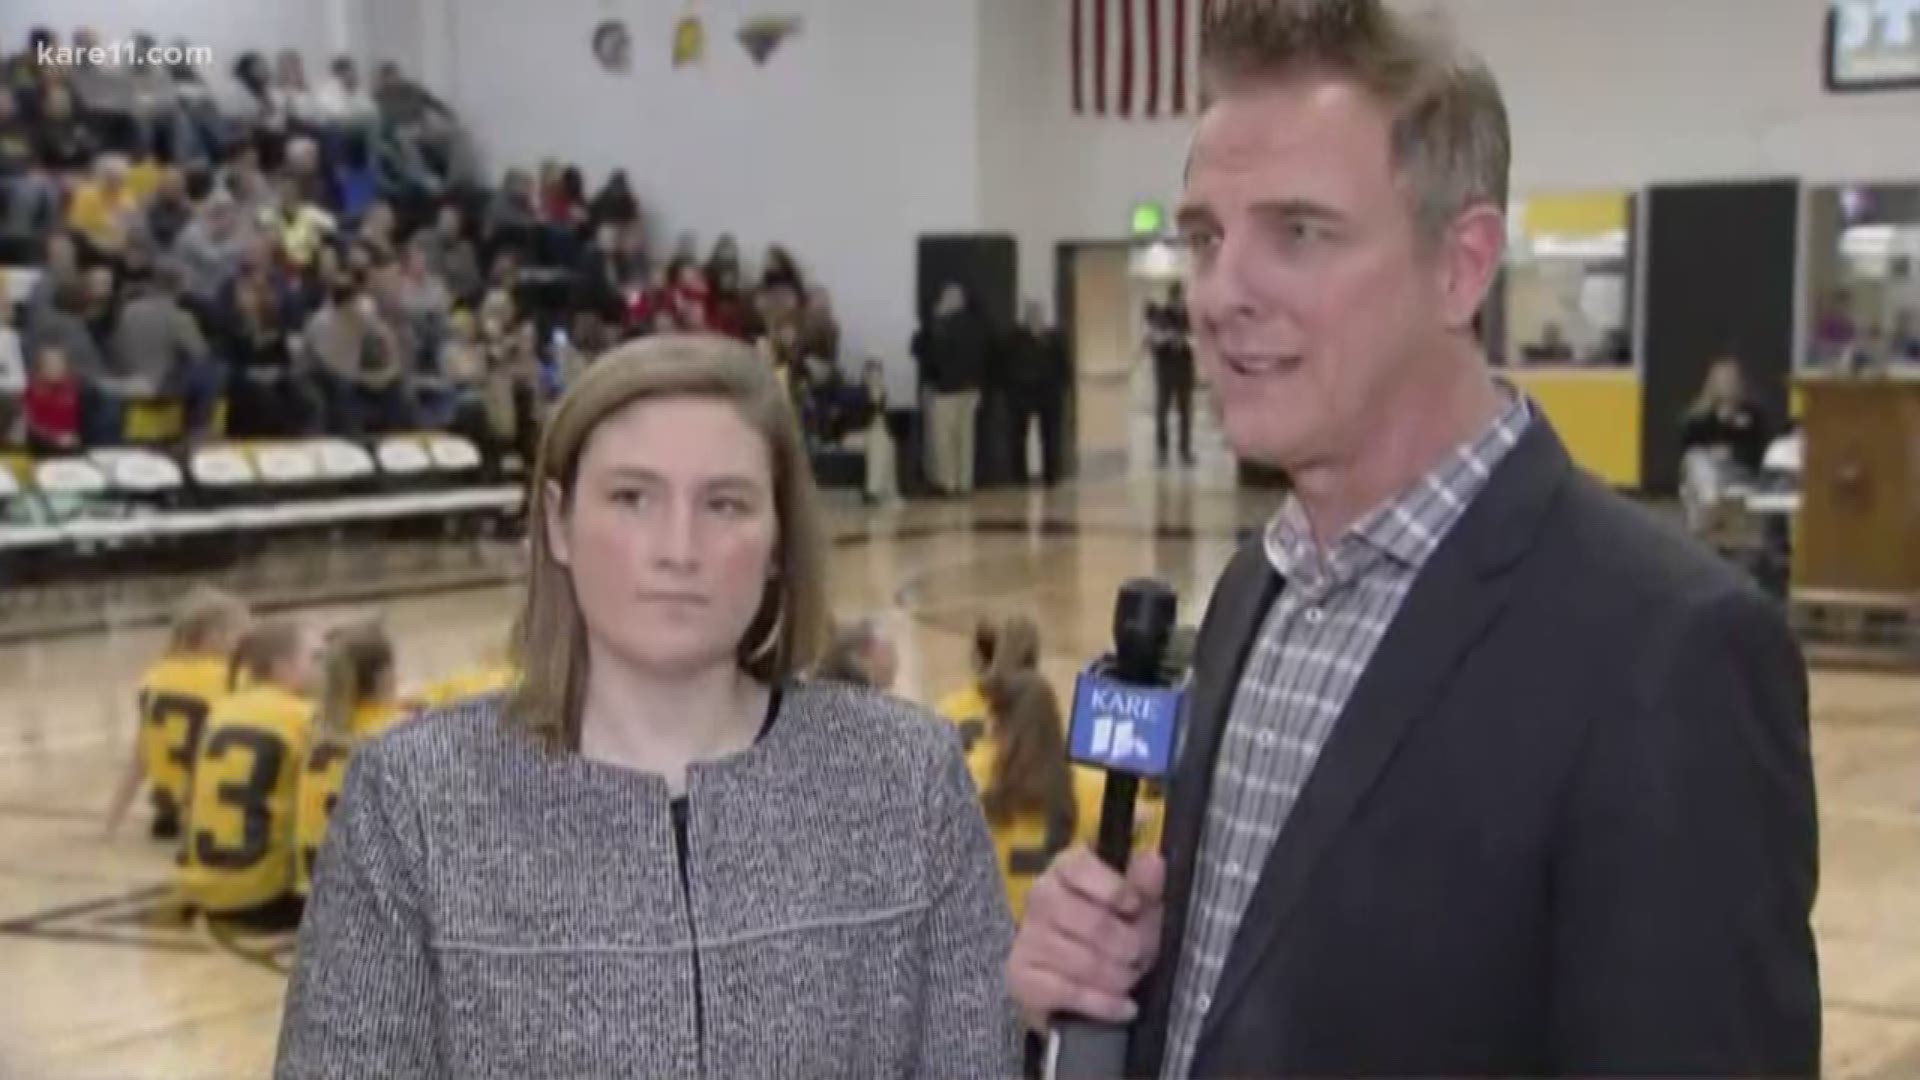 Eric Perkins caught up with Lindsey Whalen at the ceremony at Hutchinson High School to name the gym after her.